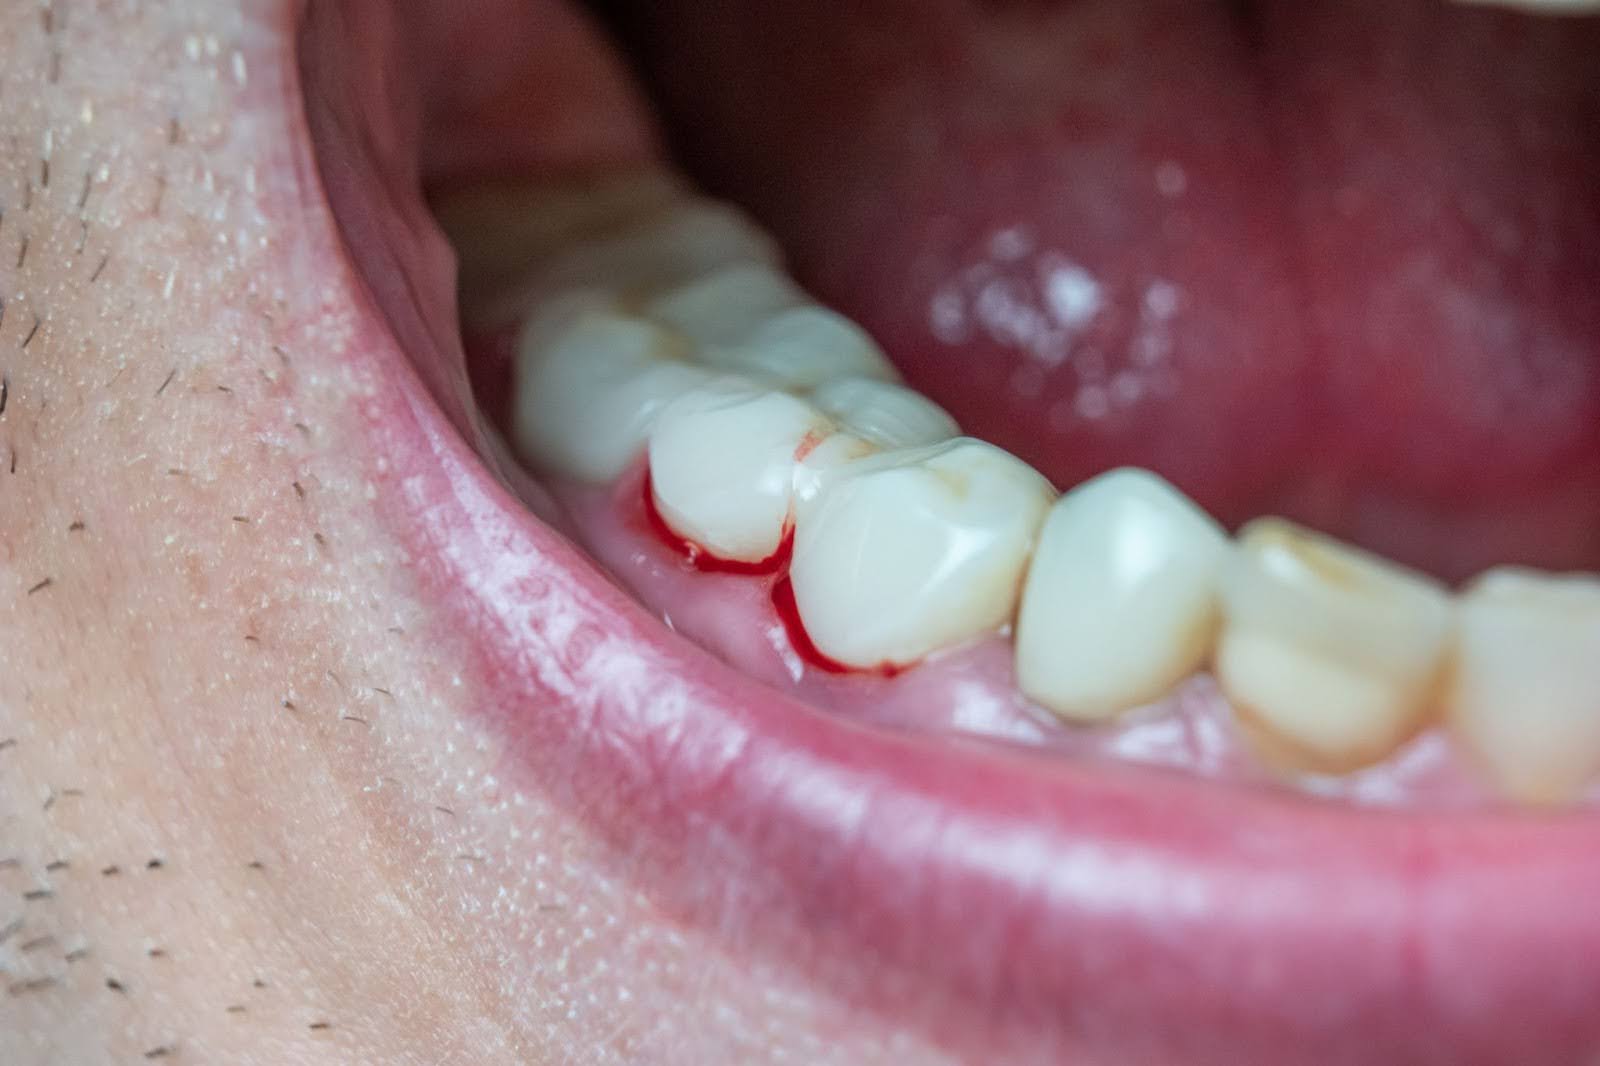 Bleeding gums are a common and often alarming symptom of gum disease